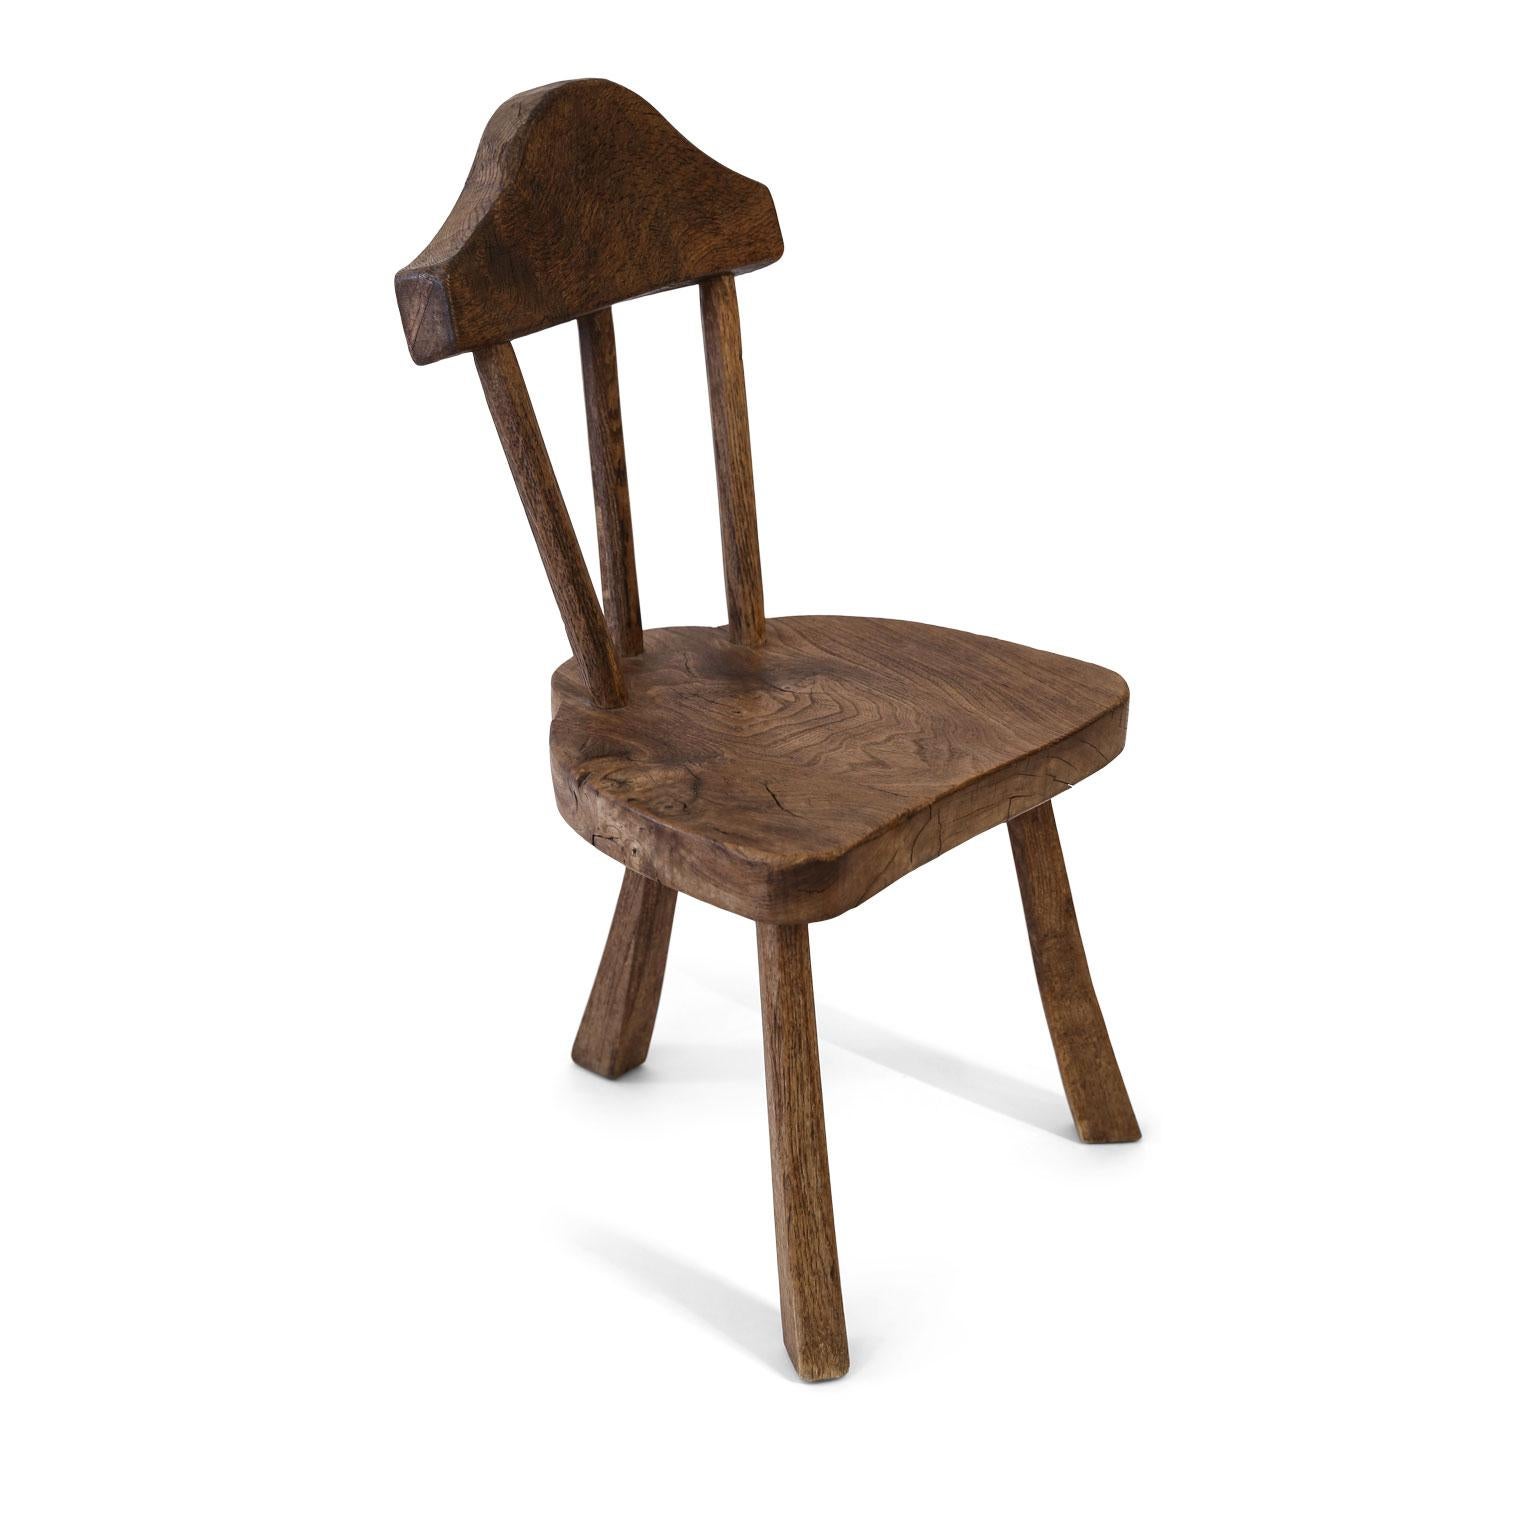 Stick back chair in mid-brown oak, constructed, circa 1925. This charming Folk Art chair in adzed oak comes from Norfolk, England, and is signed under its seat: 